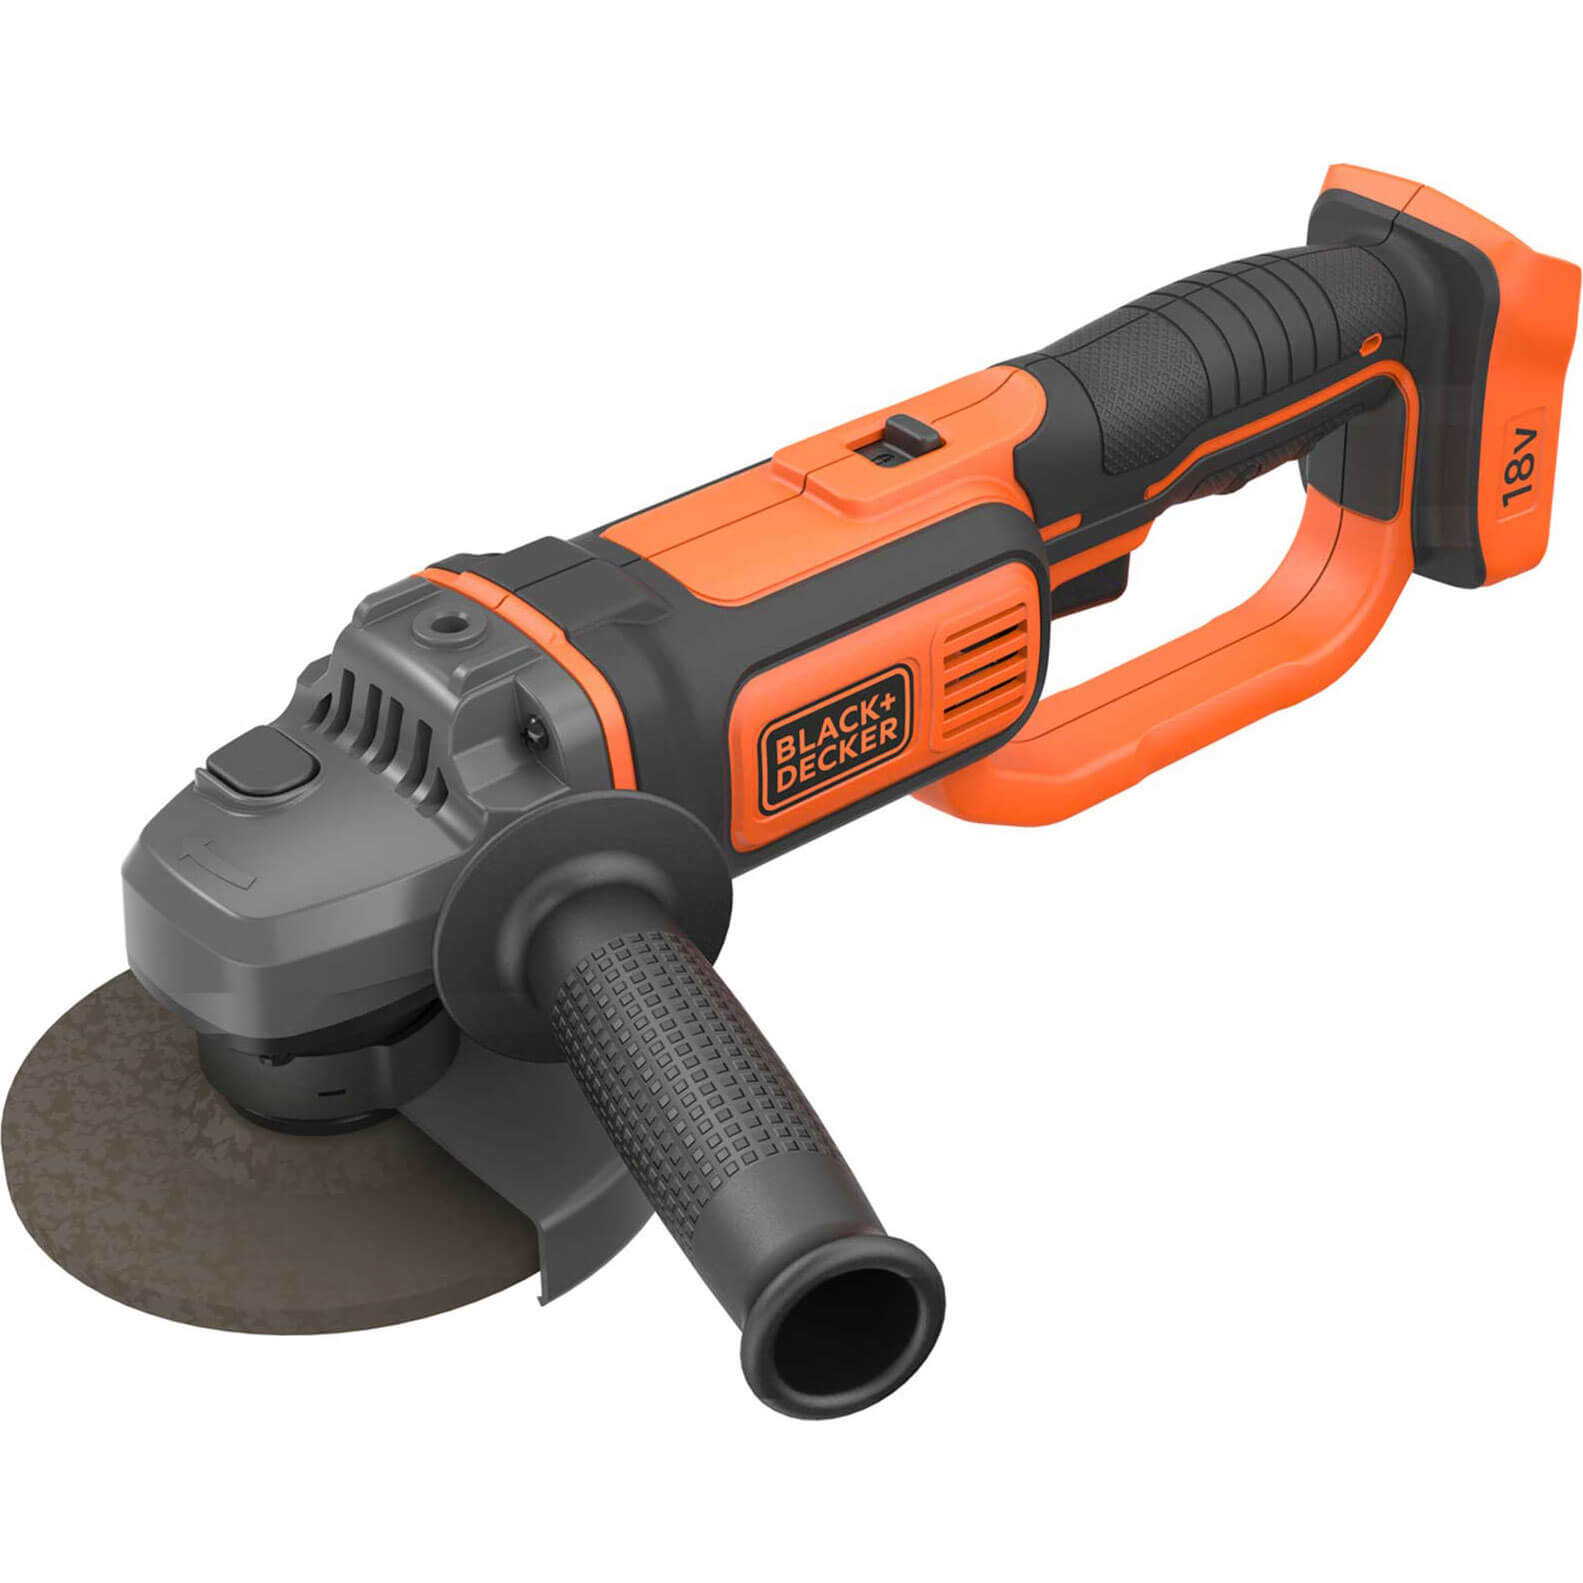 Image of Black and Decker BCG720 18v Cordless Angle Grinder 125mm No Batteries No Charger No Case